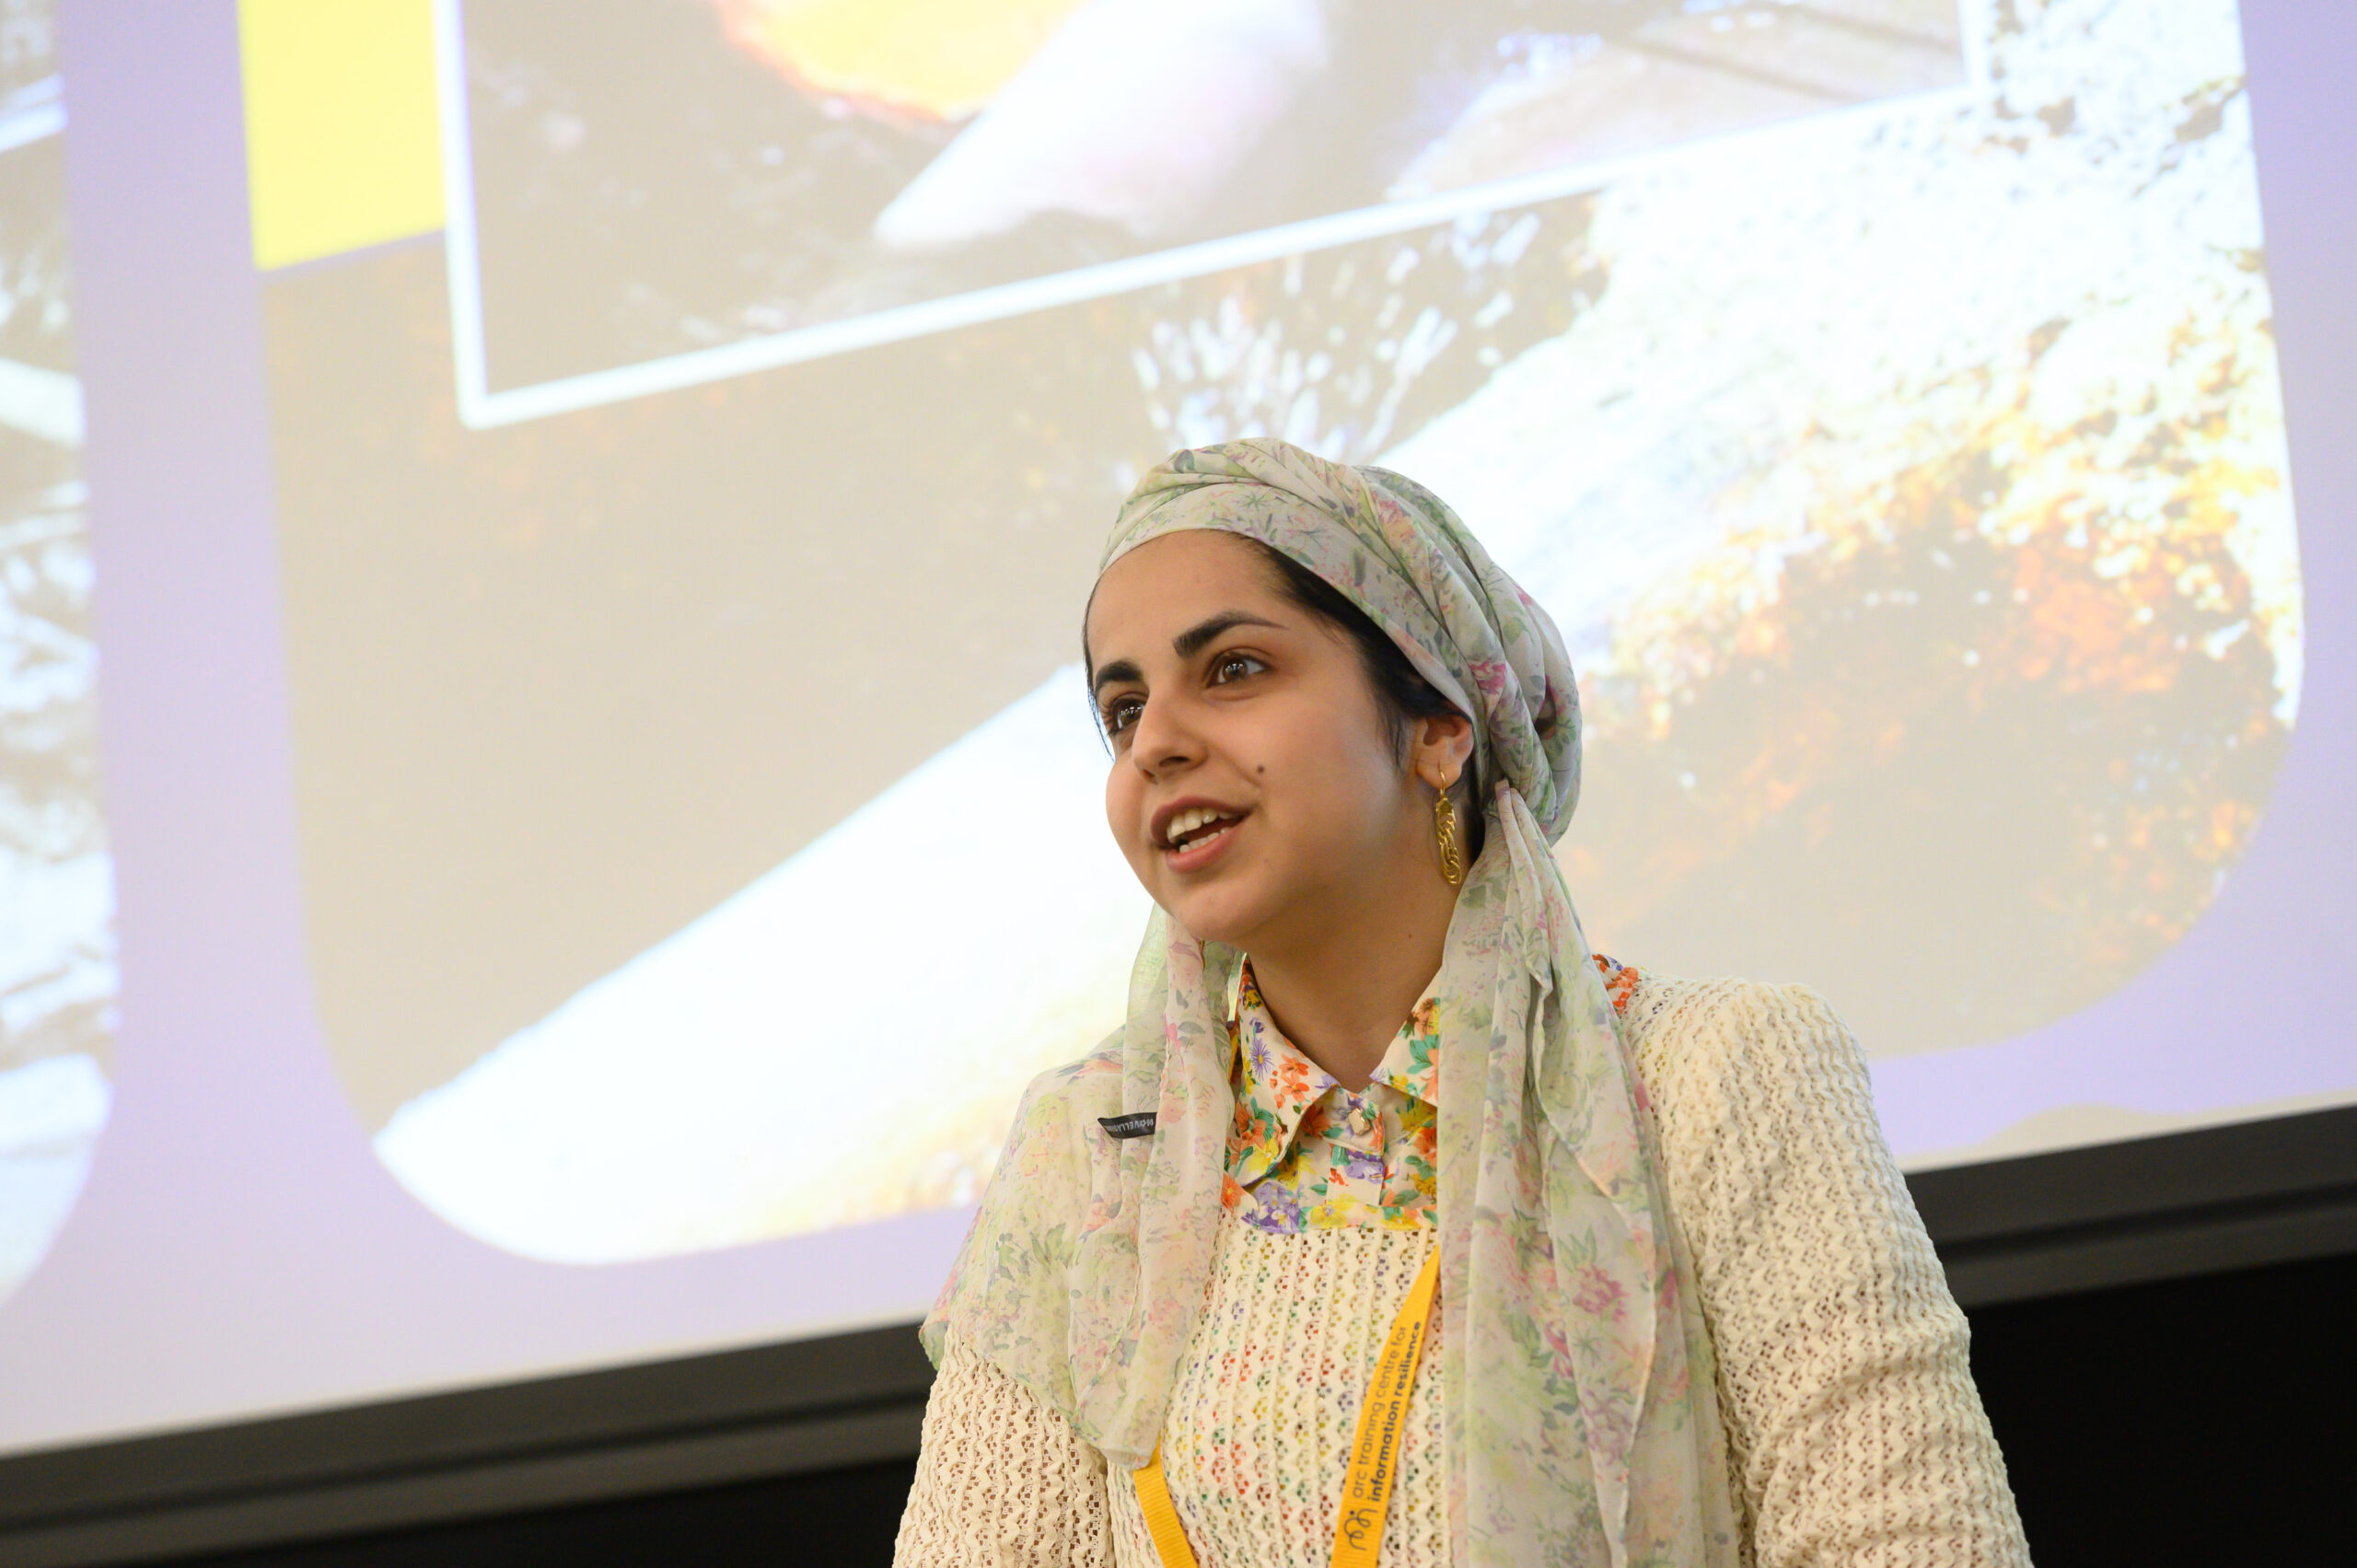 Congratulations to Ensiyeh Javaherian Pour – runner-up Three-Minute Thesis